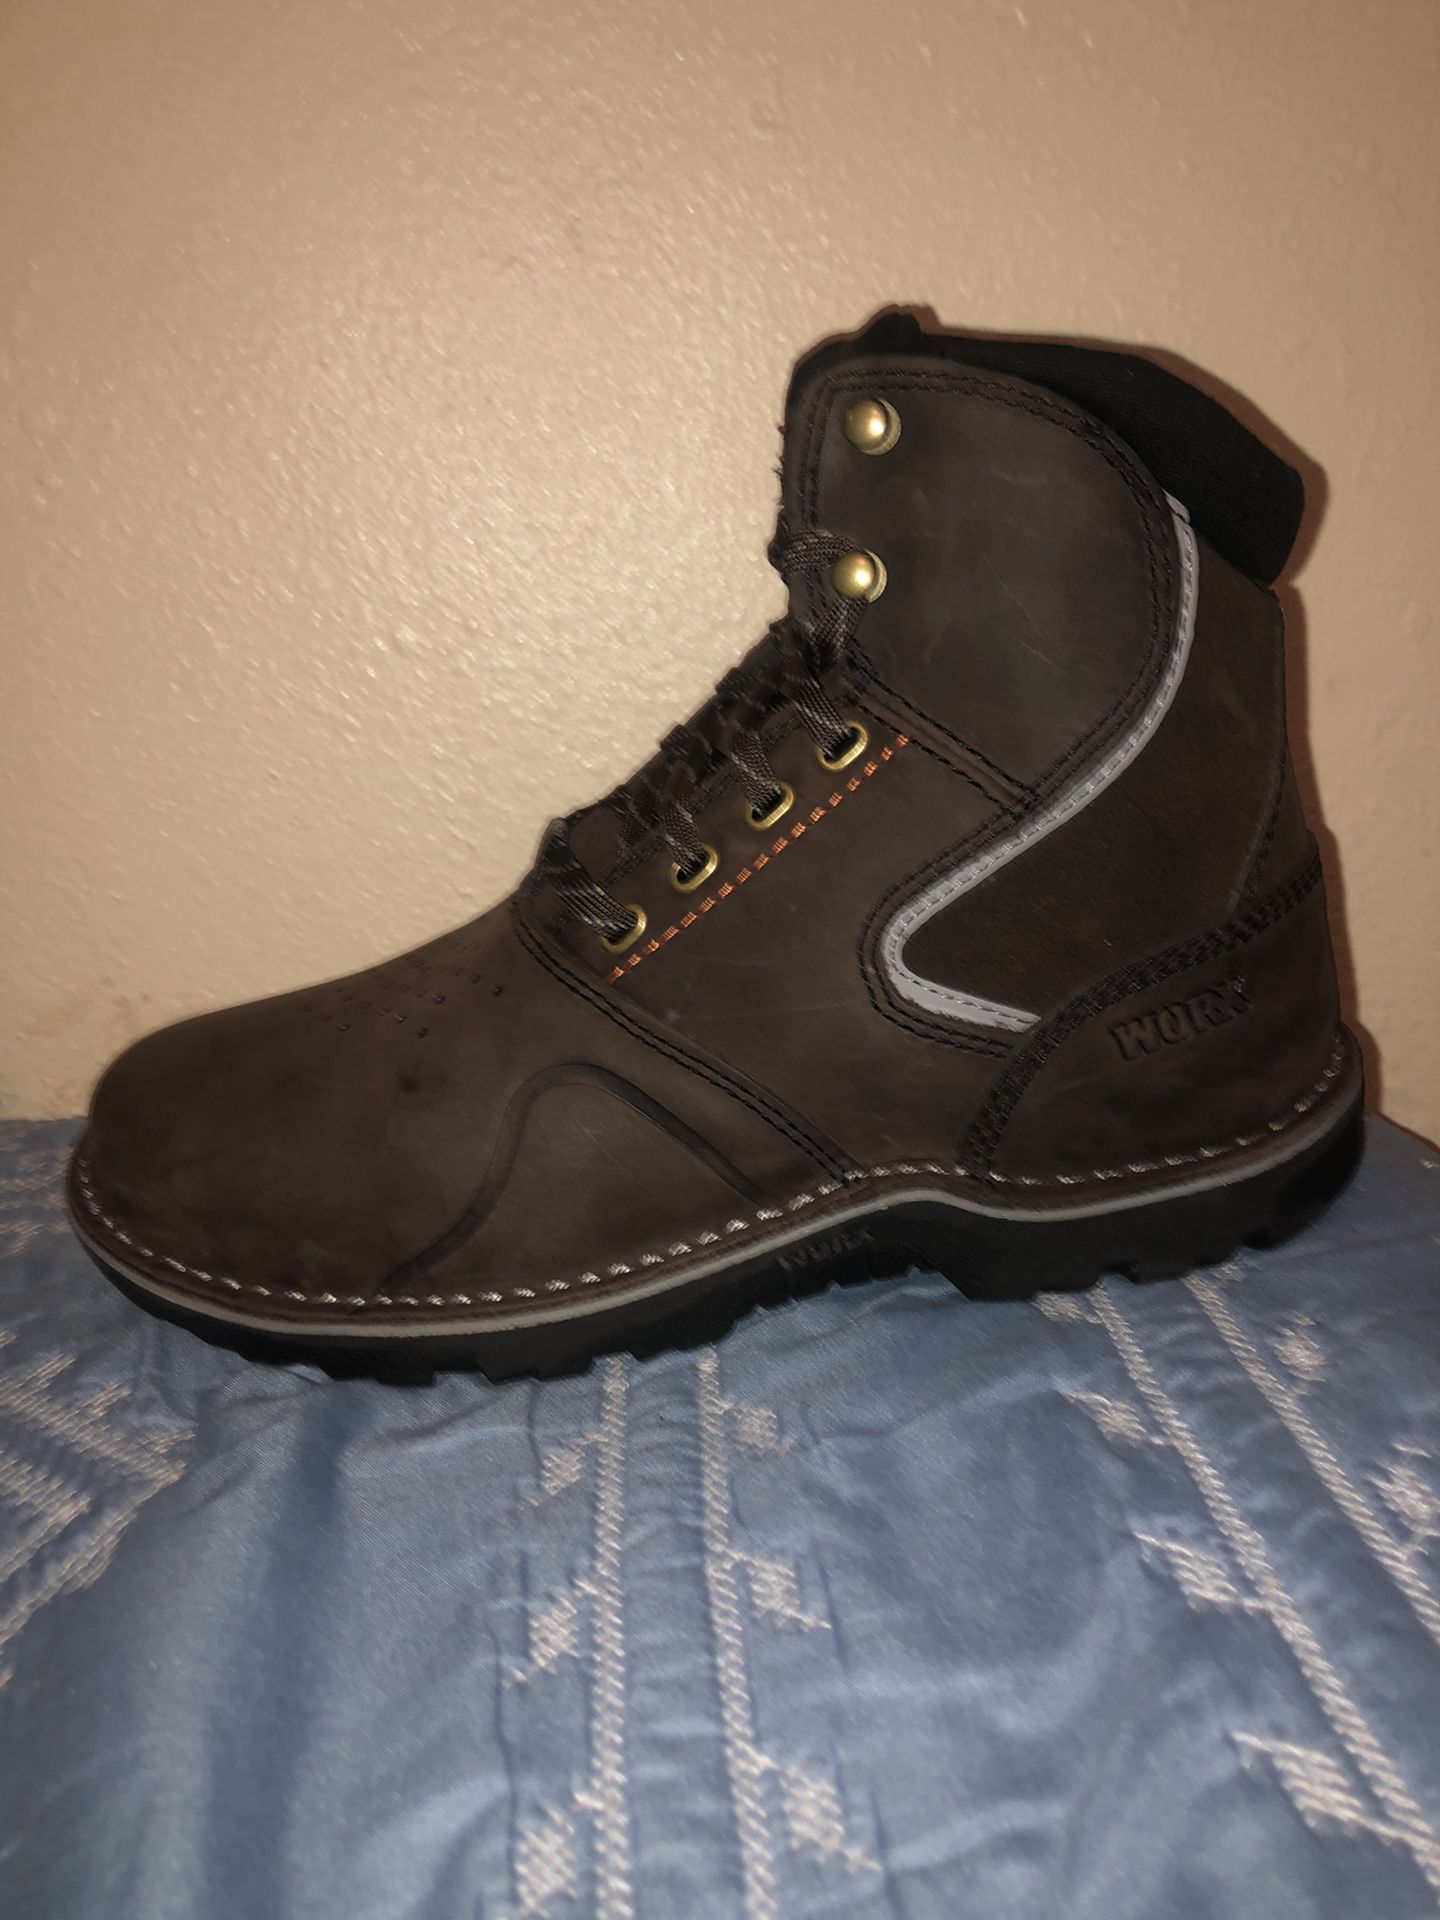 WORX by Red Wing Shoes Female Work Boots